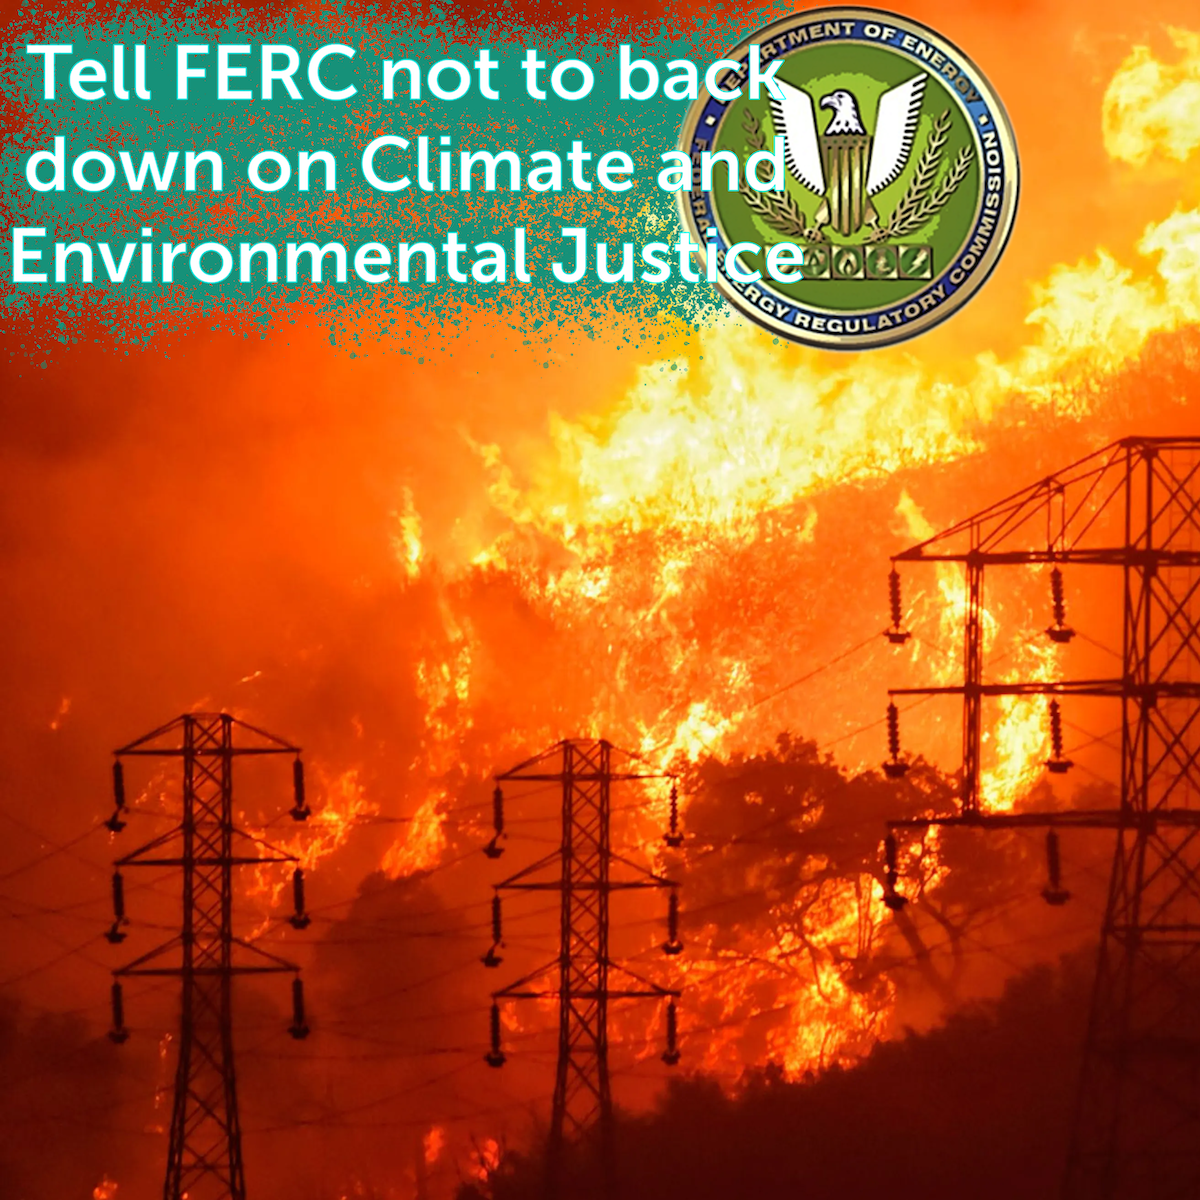 Tell FERC not to back down on Climate and Environmental Justice!